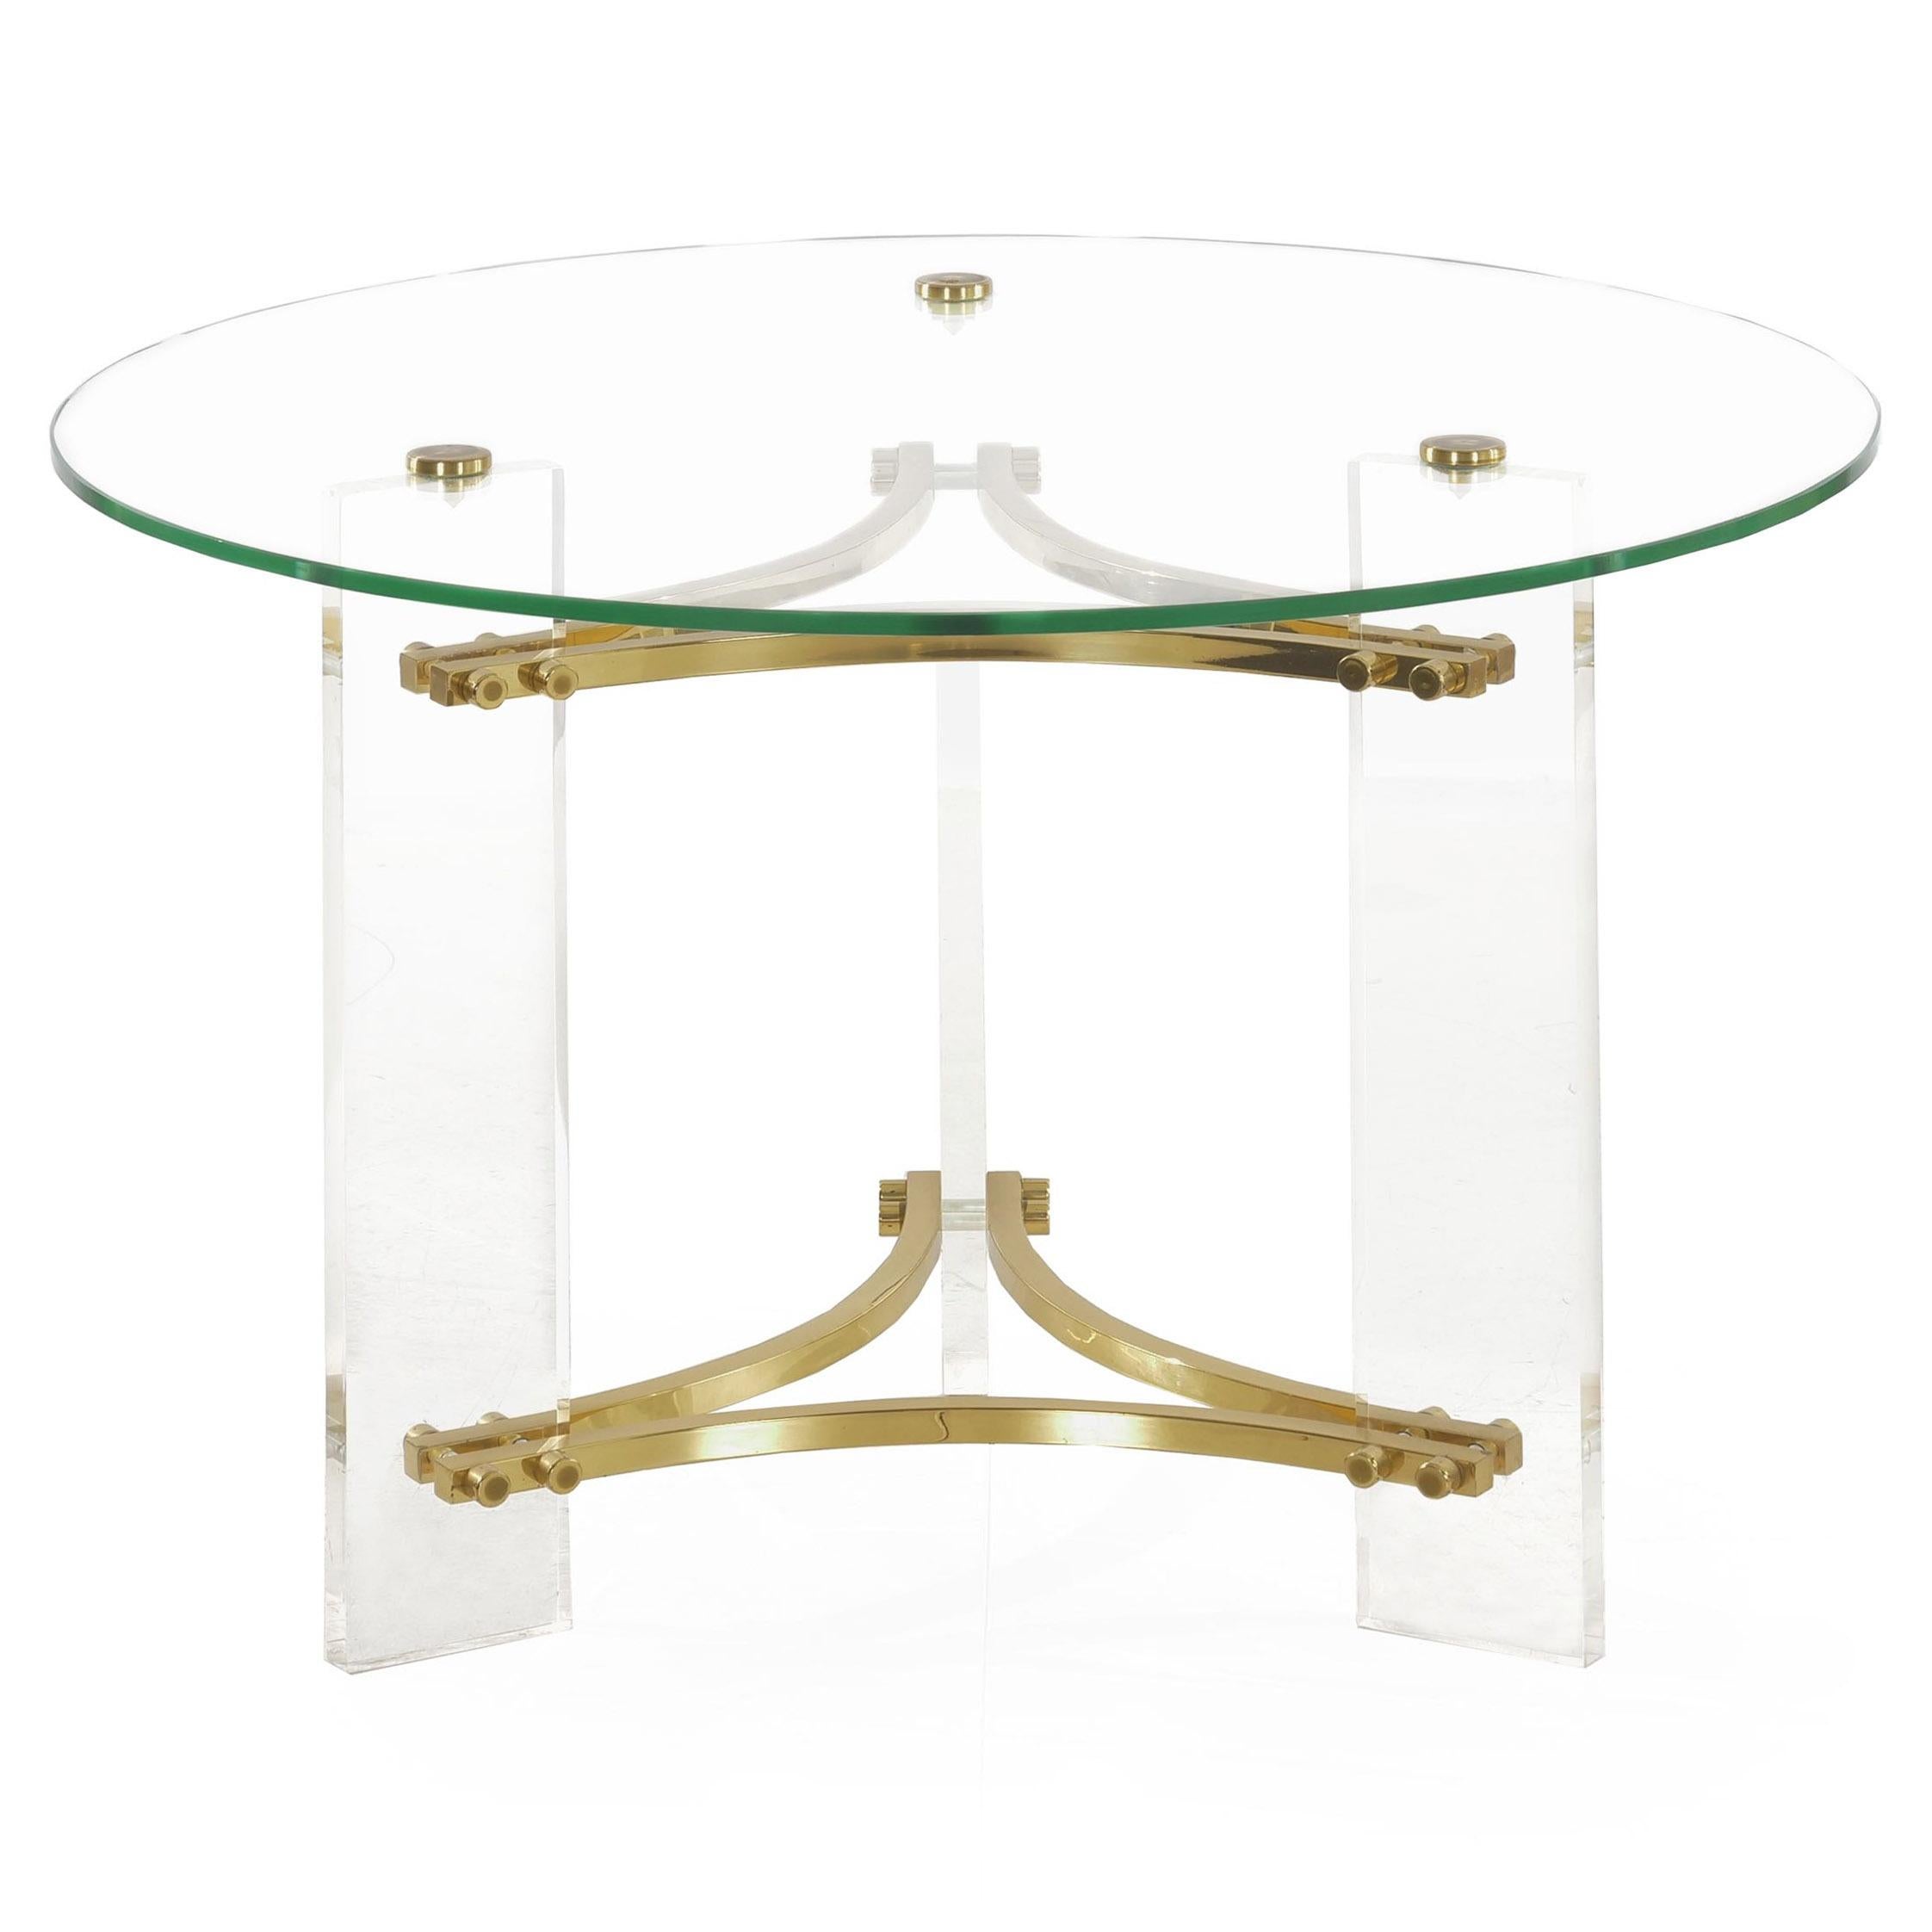 A sleek and attractive accent table designed by Charles Hollis Jones, the austere lines and translucent form allow the table to nearly disappear and leave the brass elements floating in the air. The top is a thick piece of glass affixed with turned